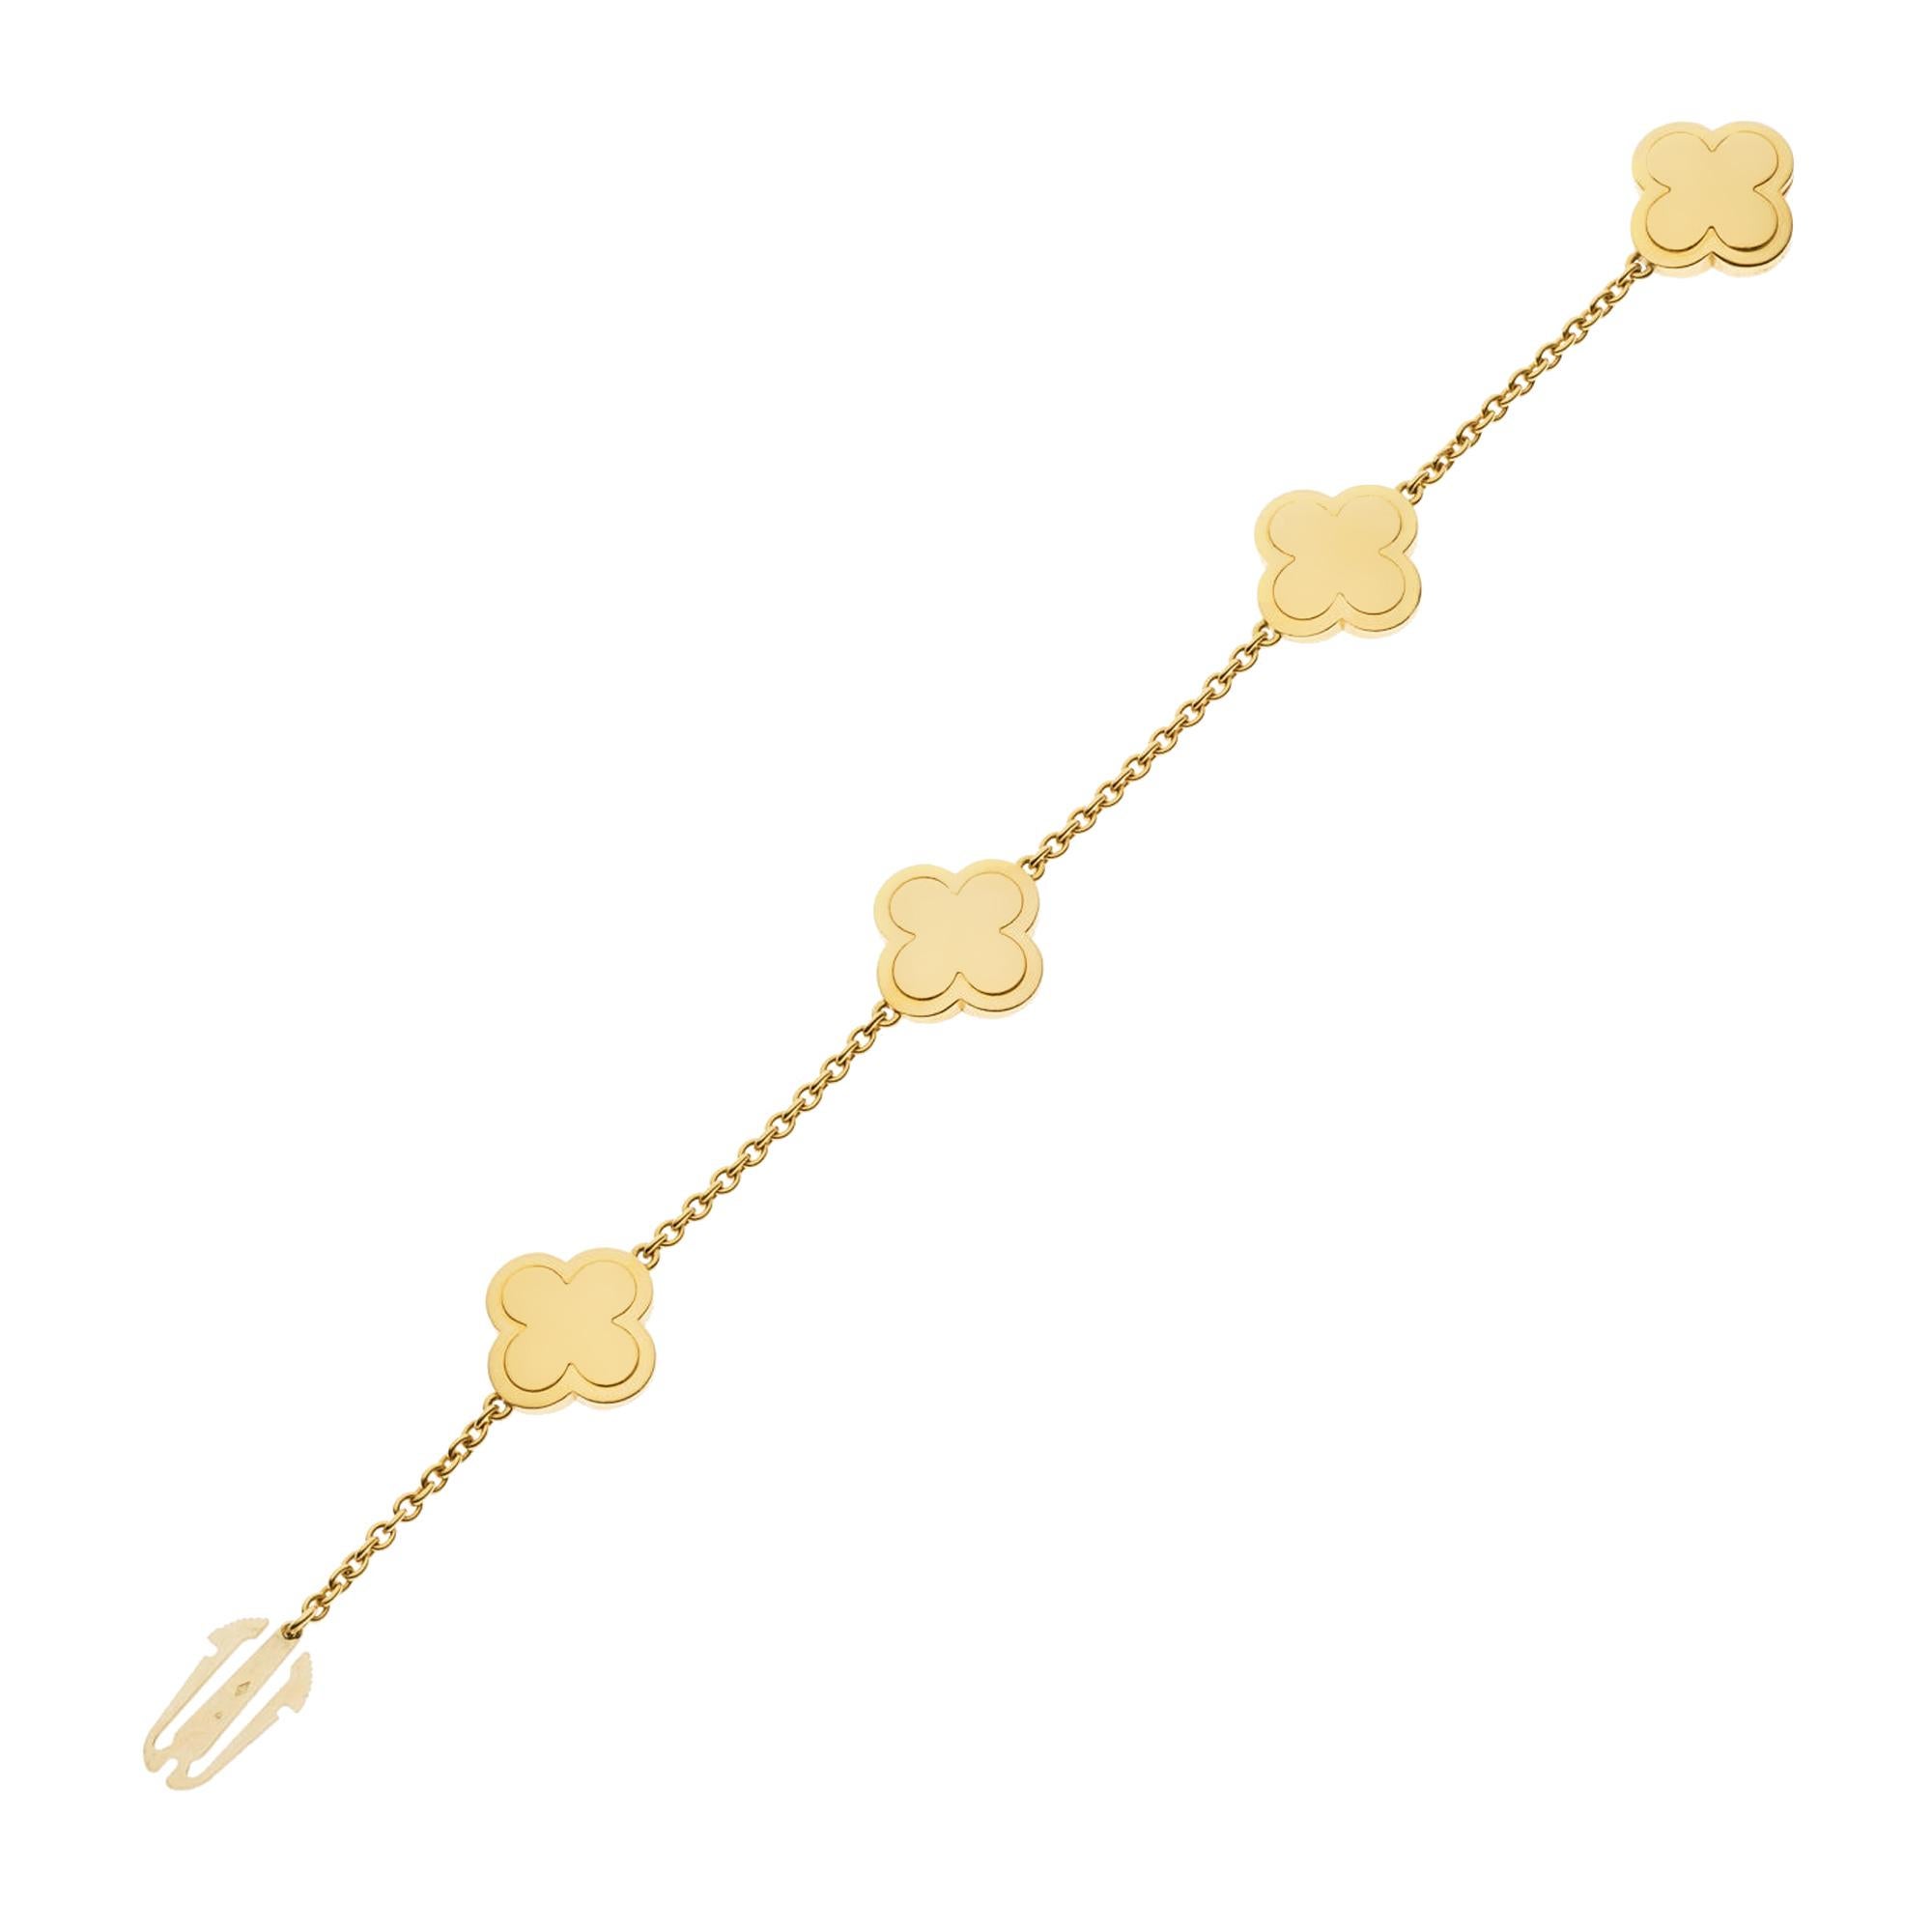 The Van Cleef & Arpels Pure Alhambra Diamond Yellow Gold Bracelet is an epitome of luxurious elegance and timeless design. This exquisite piece is part of the renowned Pure Alhambra collection, which draws inspiration from the Moorish charm of the